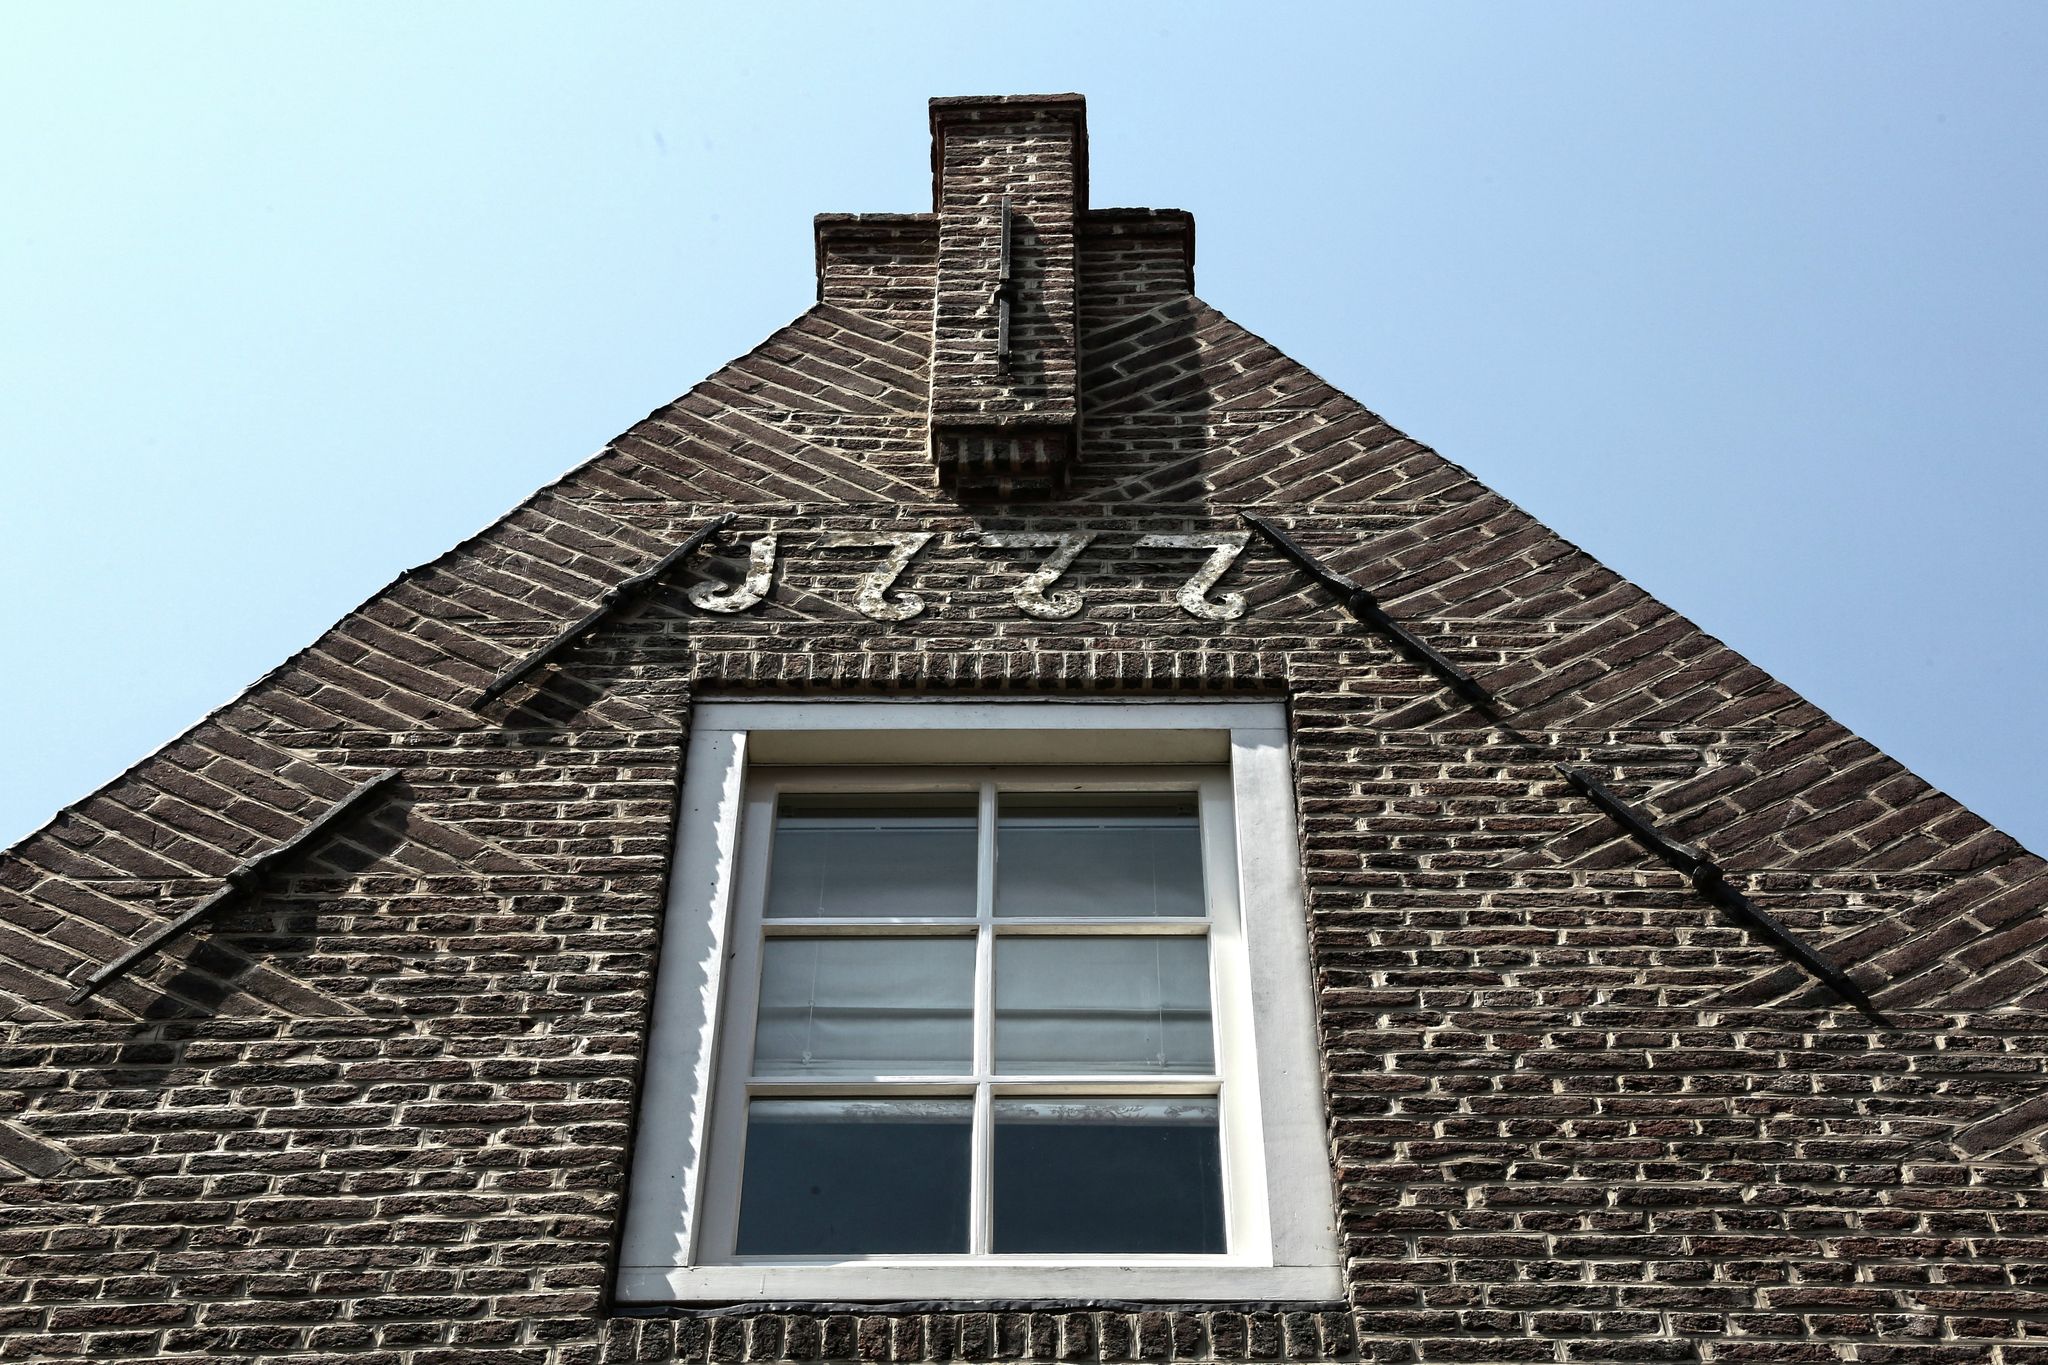 Listed 1777 building in historical Enkhuizen